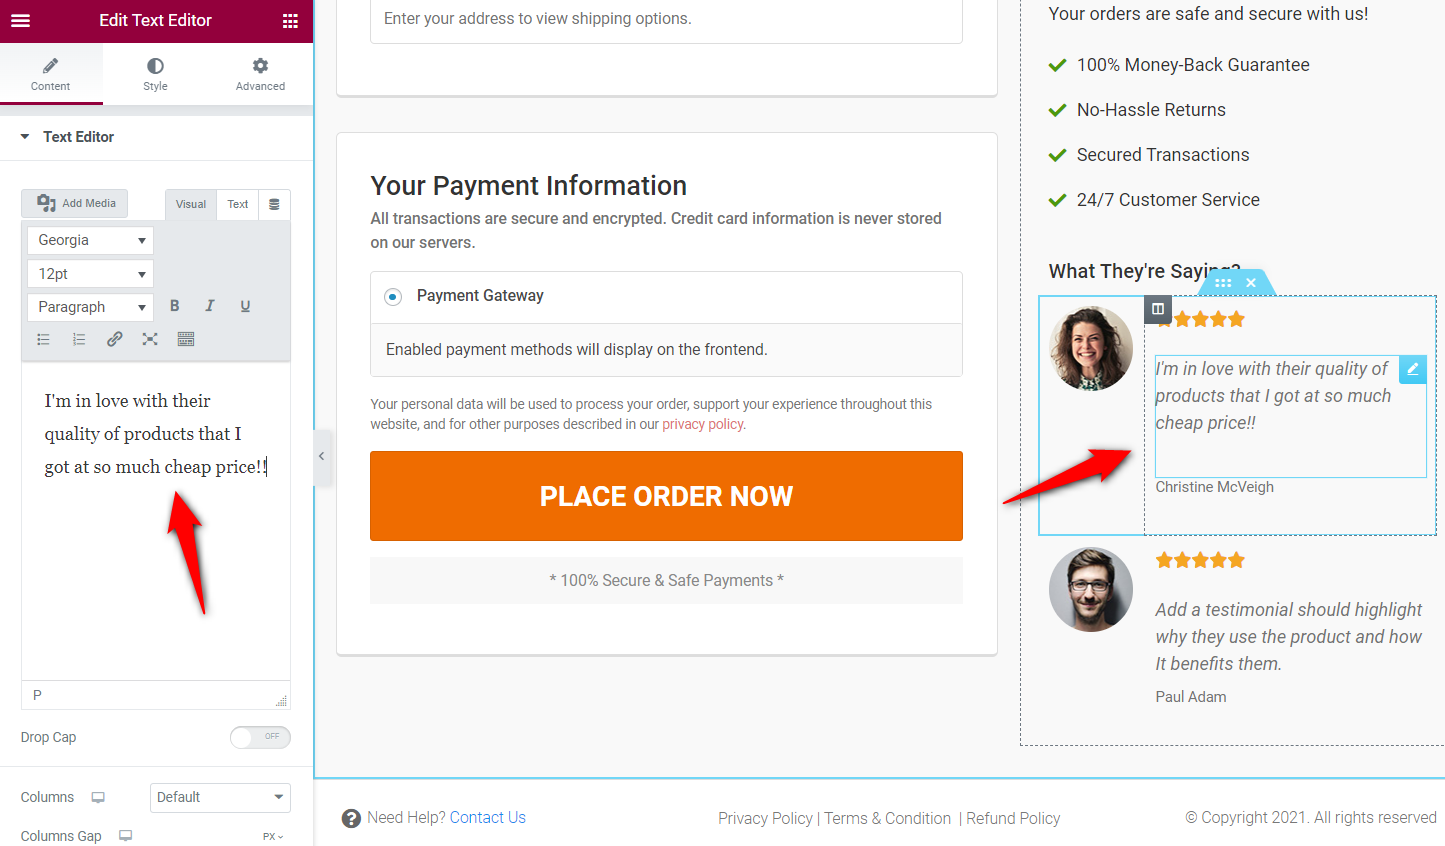 Customize the credibility markers including the benefit and testimonial section on the WooCommerce checkout page